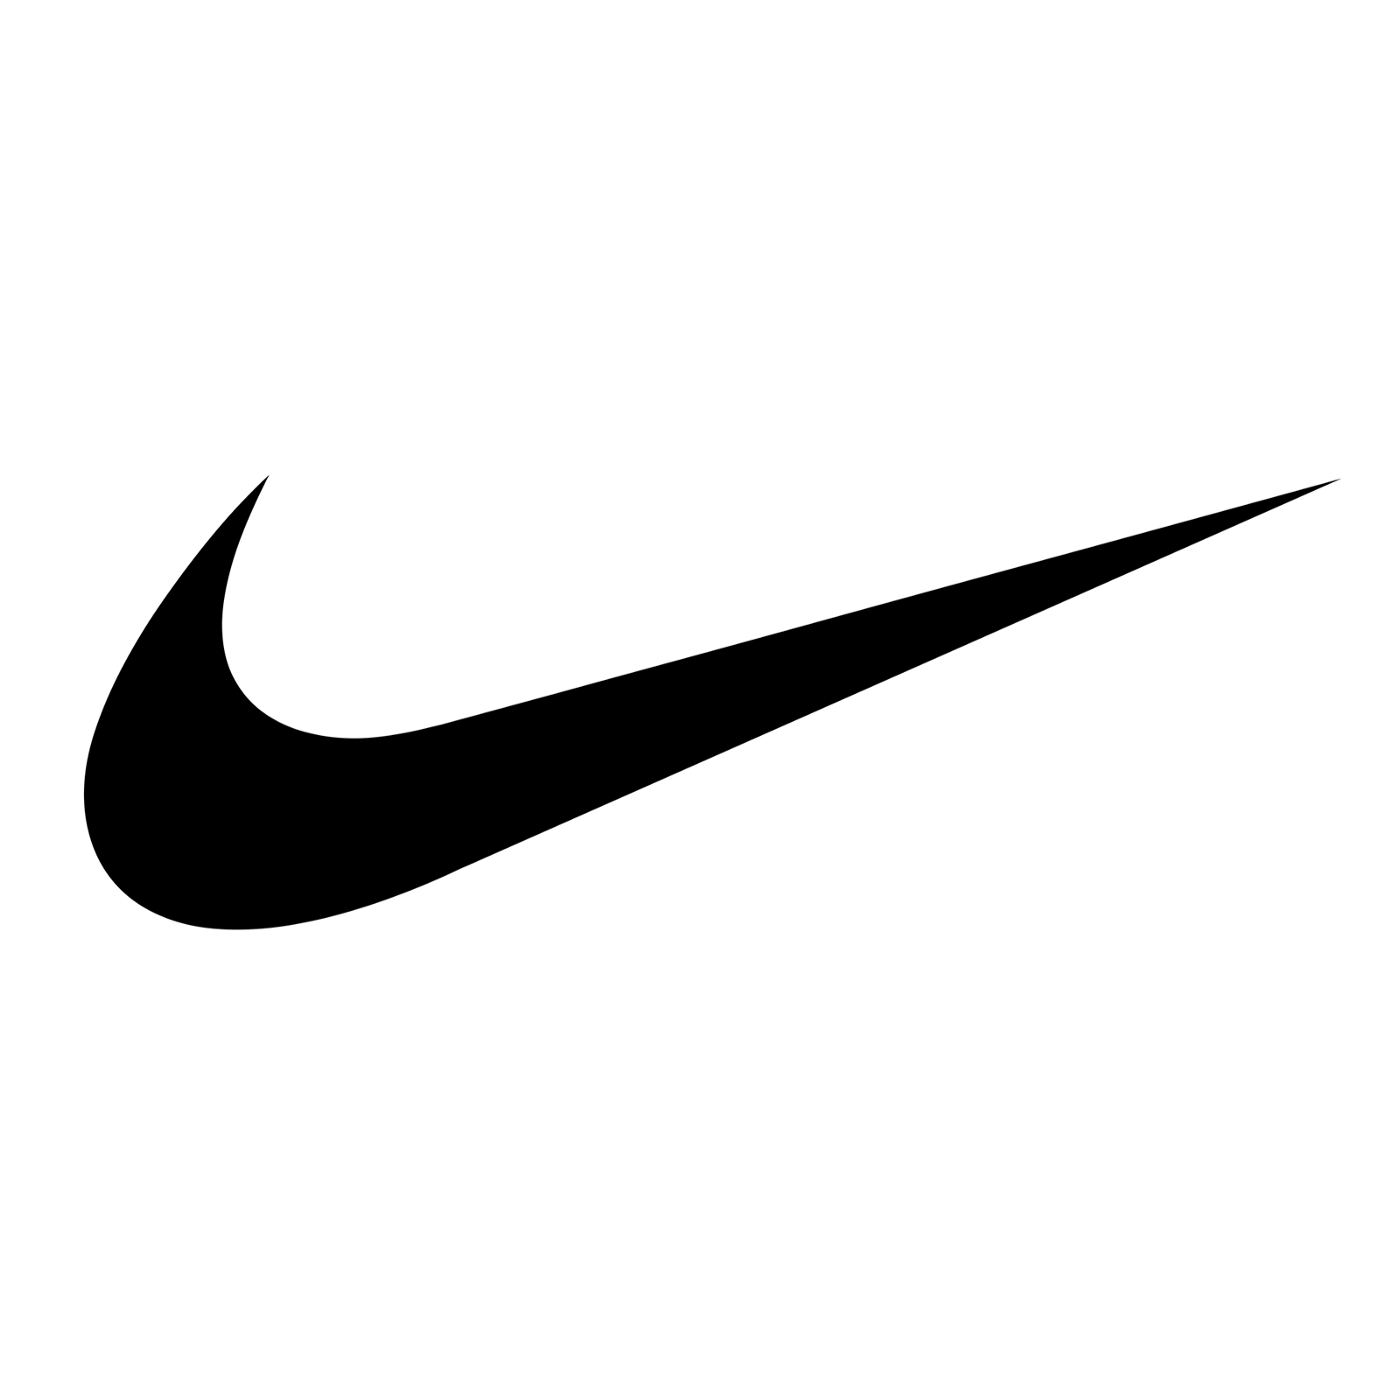 Nike Company Profile, Information, Business Description, History and Social link